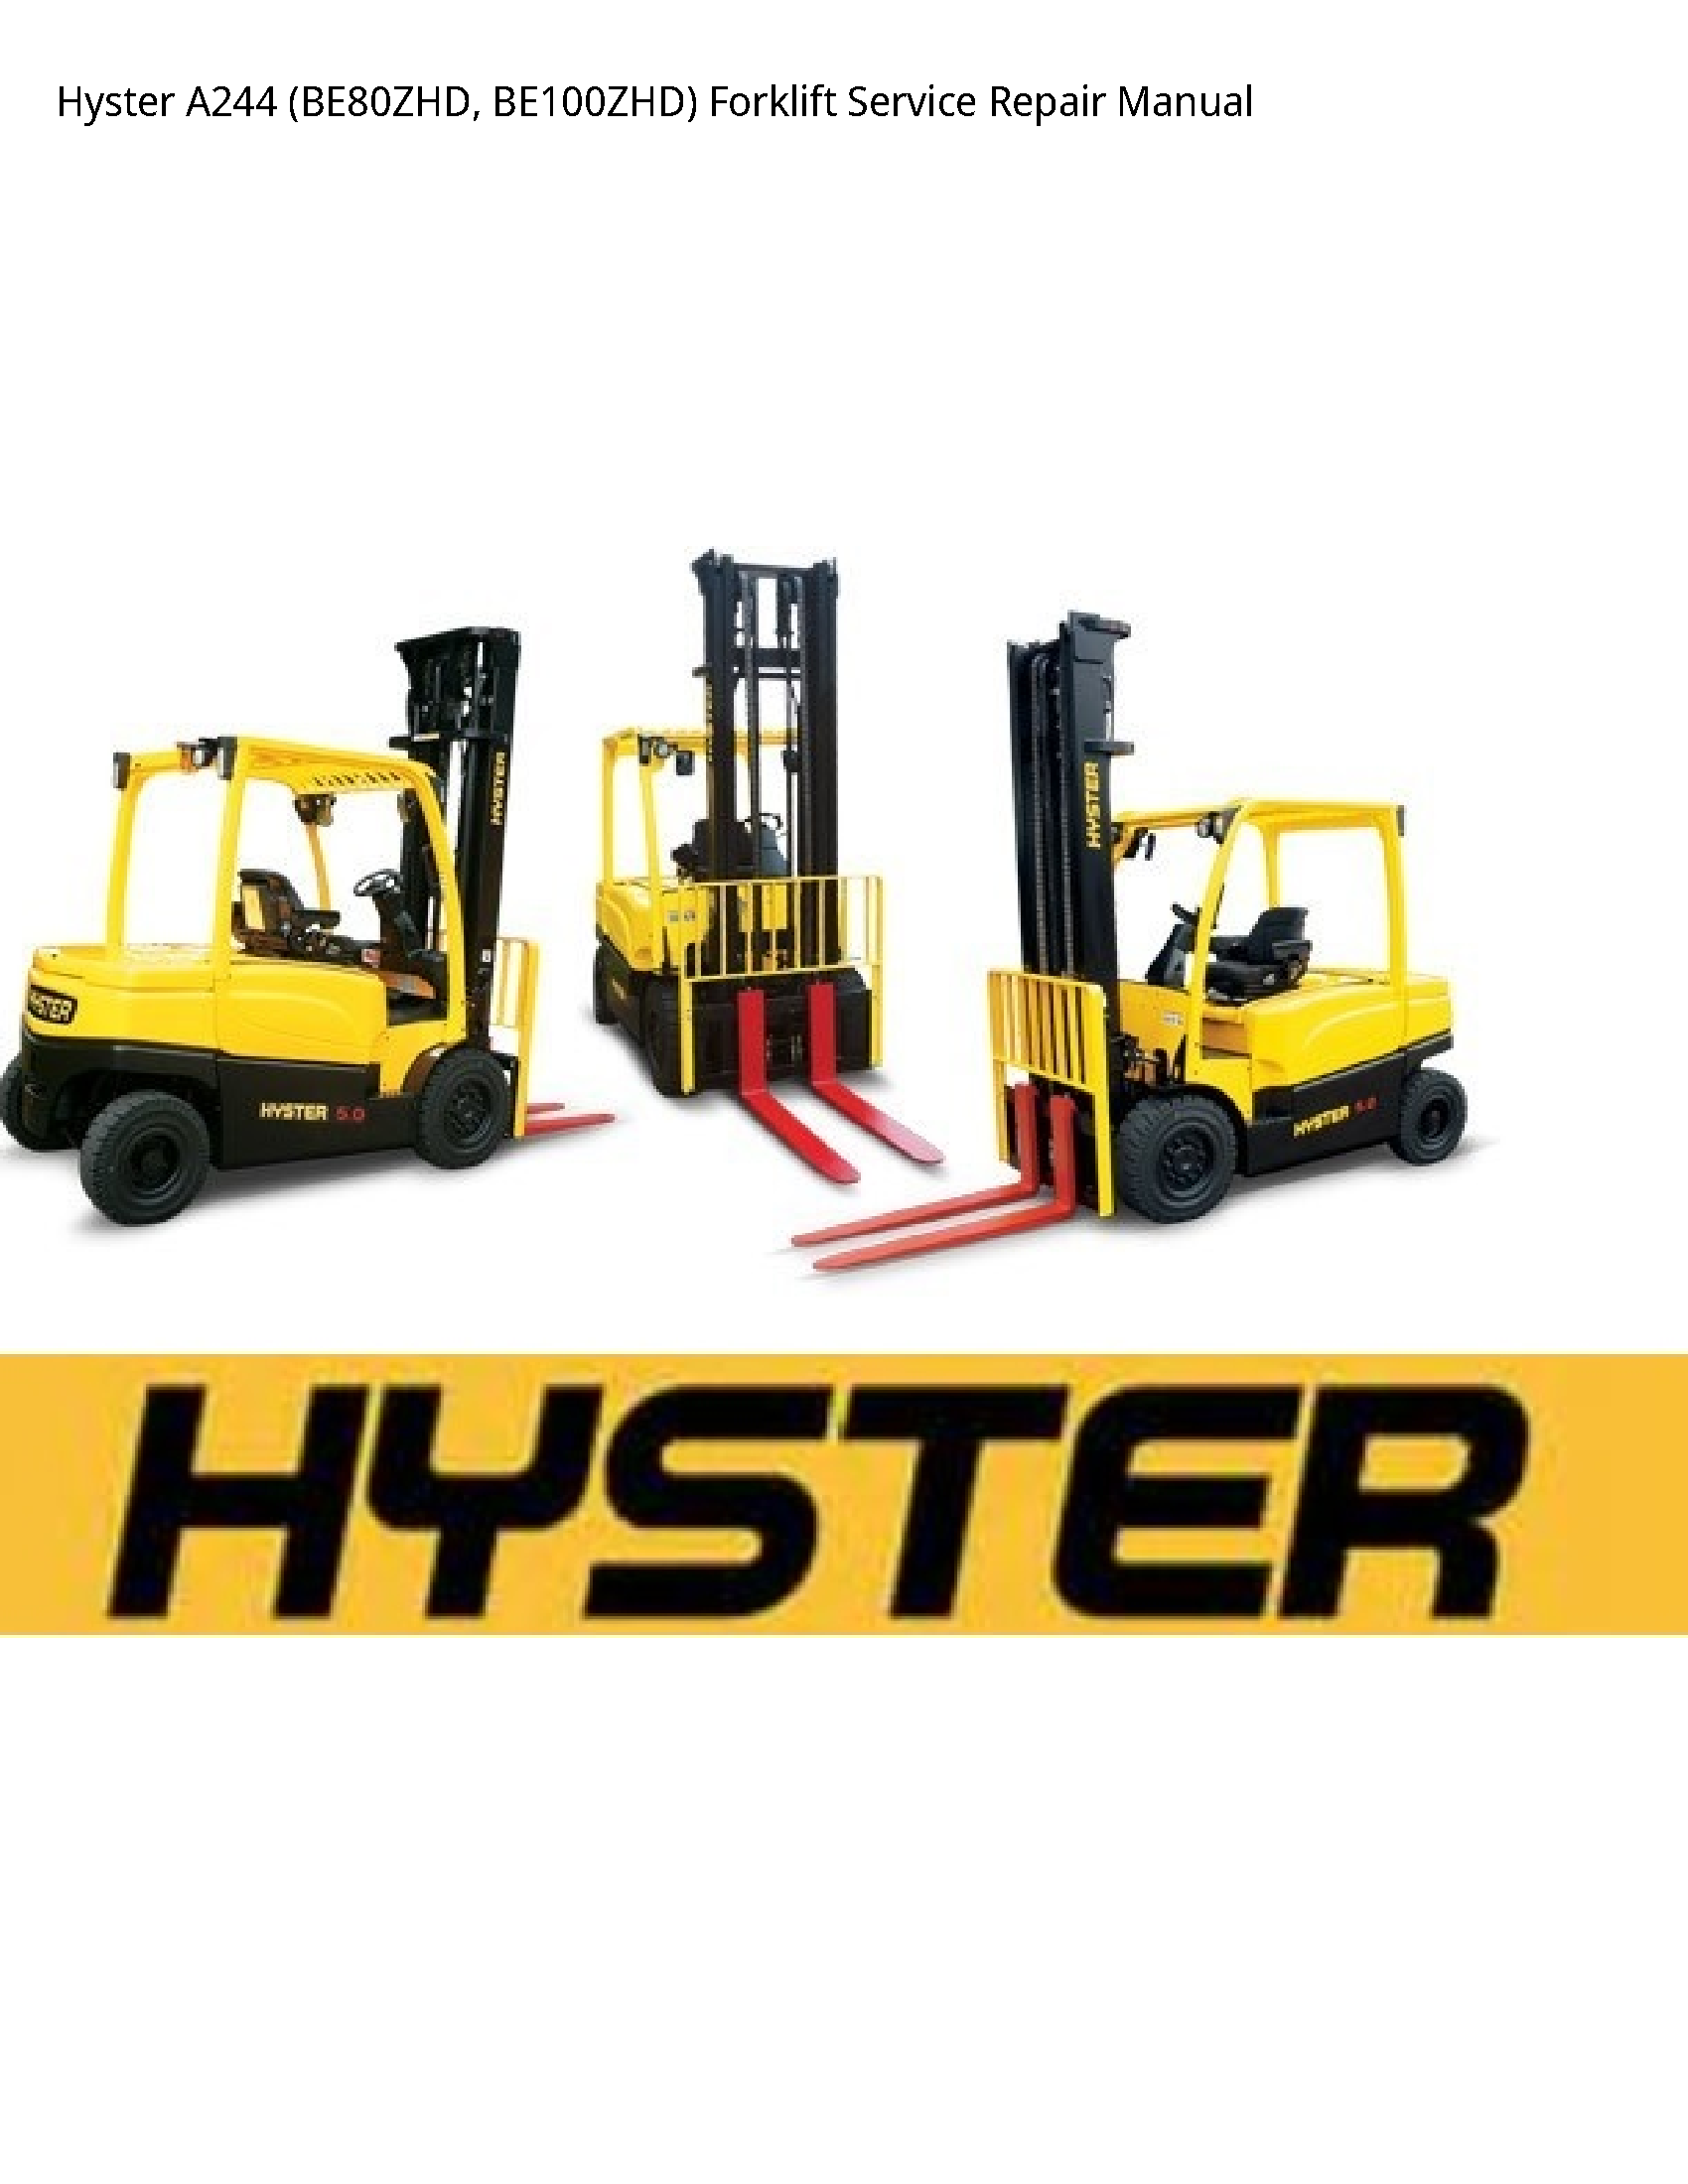 Hyster A244 Forklift manual